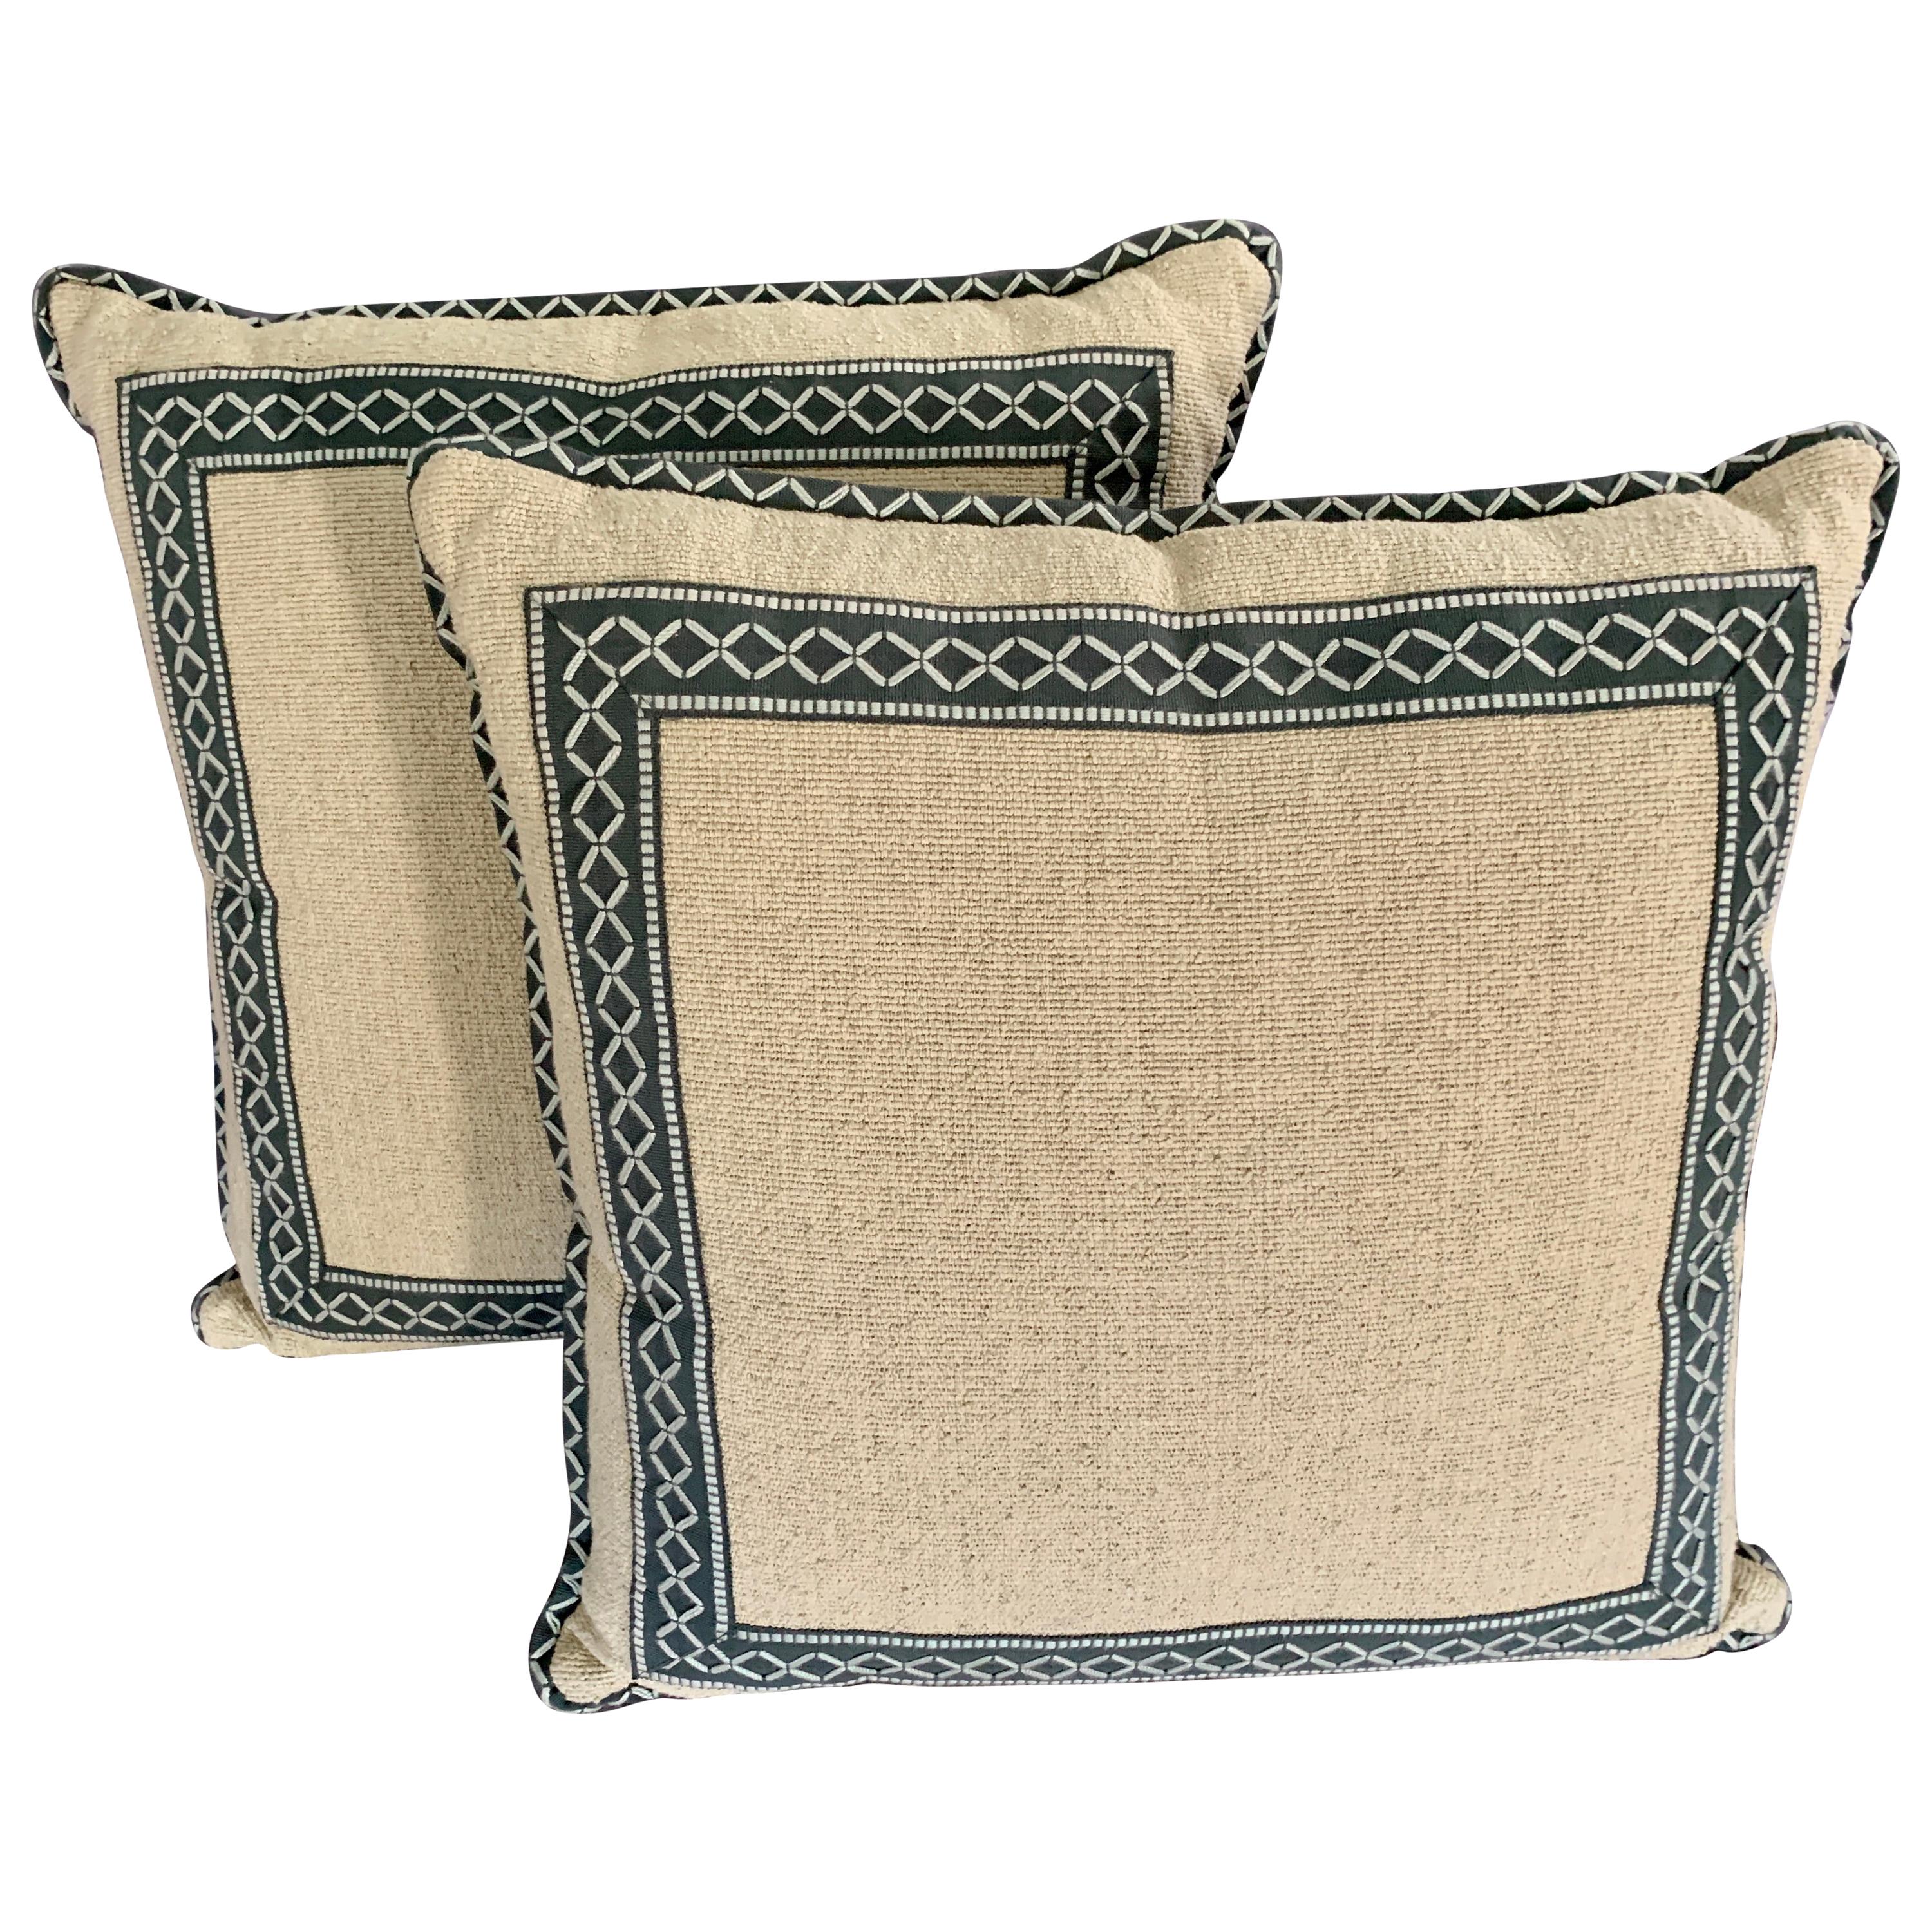 Pair of Square Woven Pillows with Custom Trim and Edging